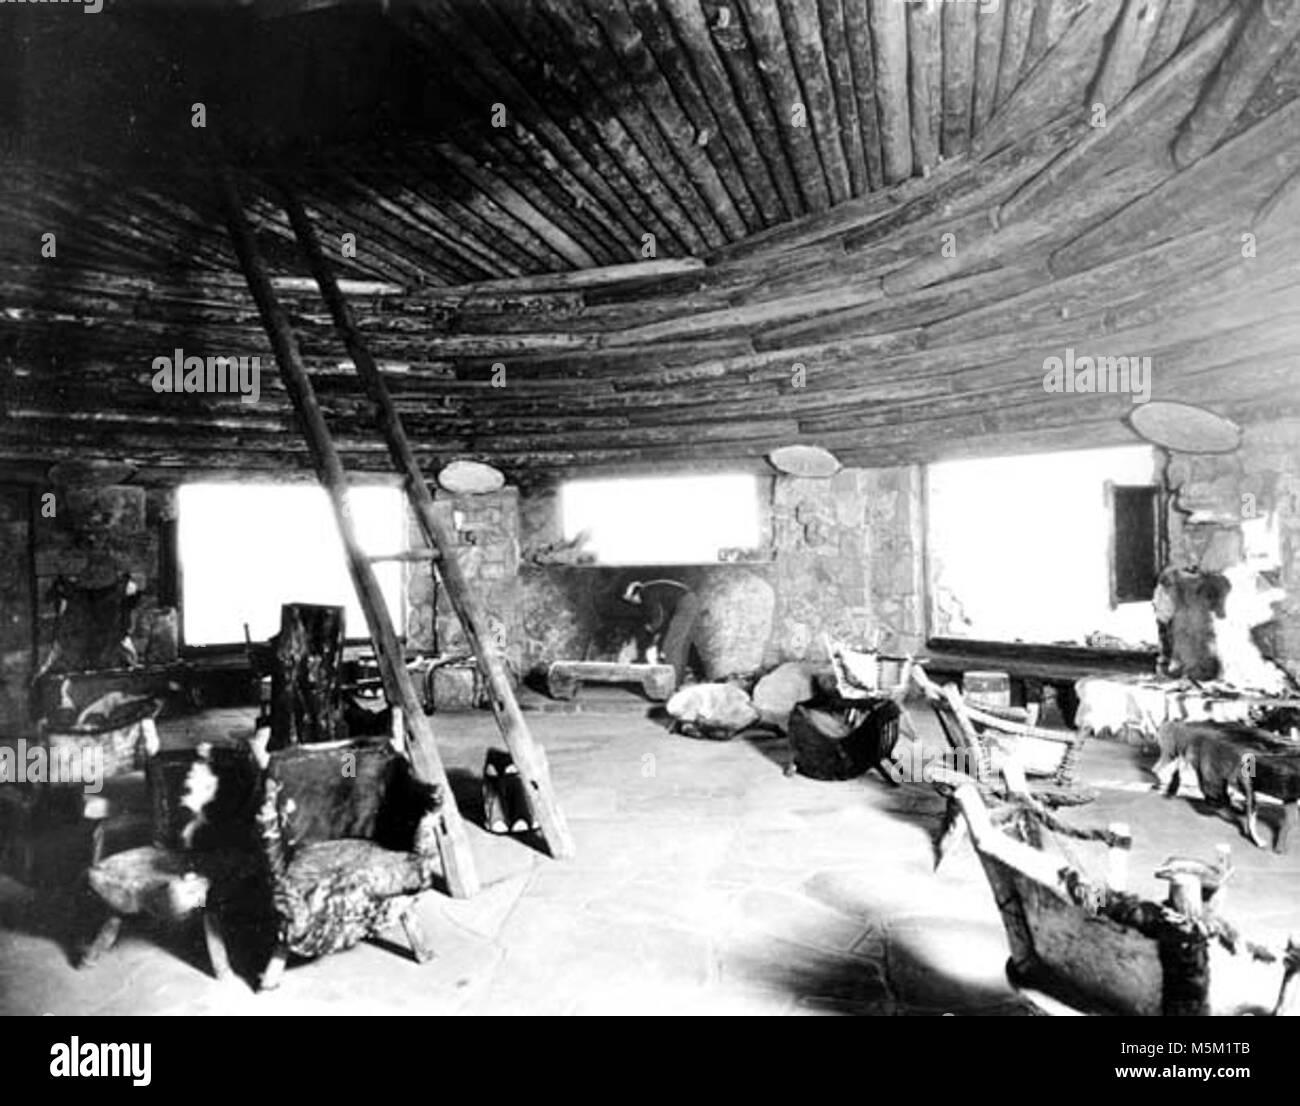 Grand Canyon Historic- Desert View Watchtower Interior c . INTERIOR  DESERT VIEW  WATCHTOWER KIVA ROOM. MARY COLTER DECOR. NATIVE EMPLOYEE BY  FIREPLACE.TIMBERS SALVAGED FROM GRANDVIEW HOTEL. GRCA 15934 CIRCA 1932. FRED HARVEY CO. Stock Photo